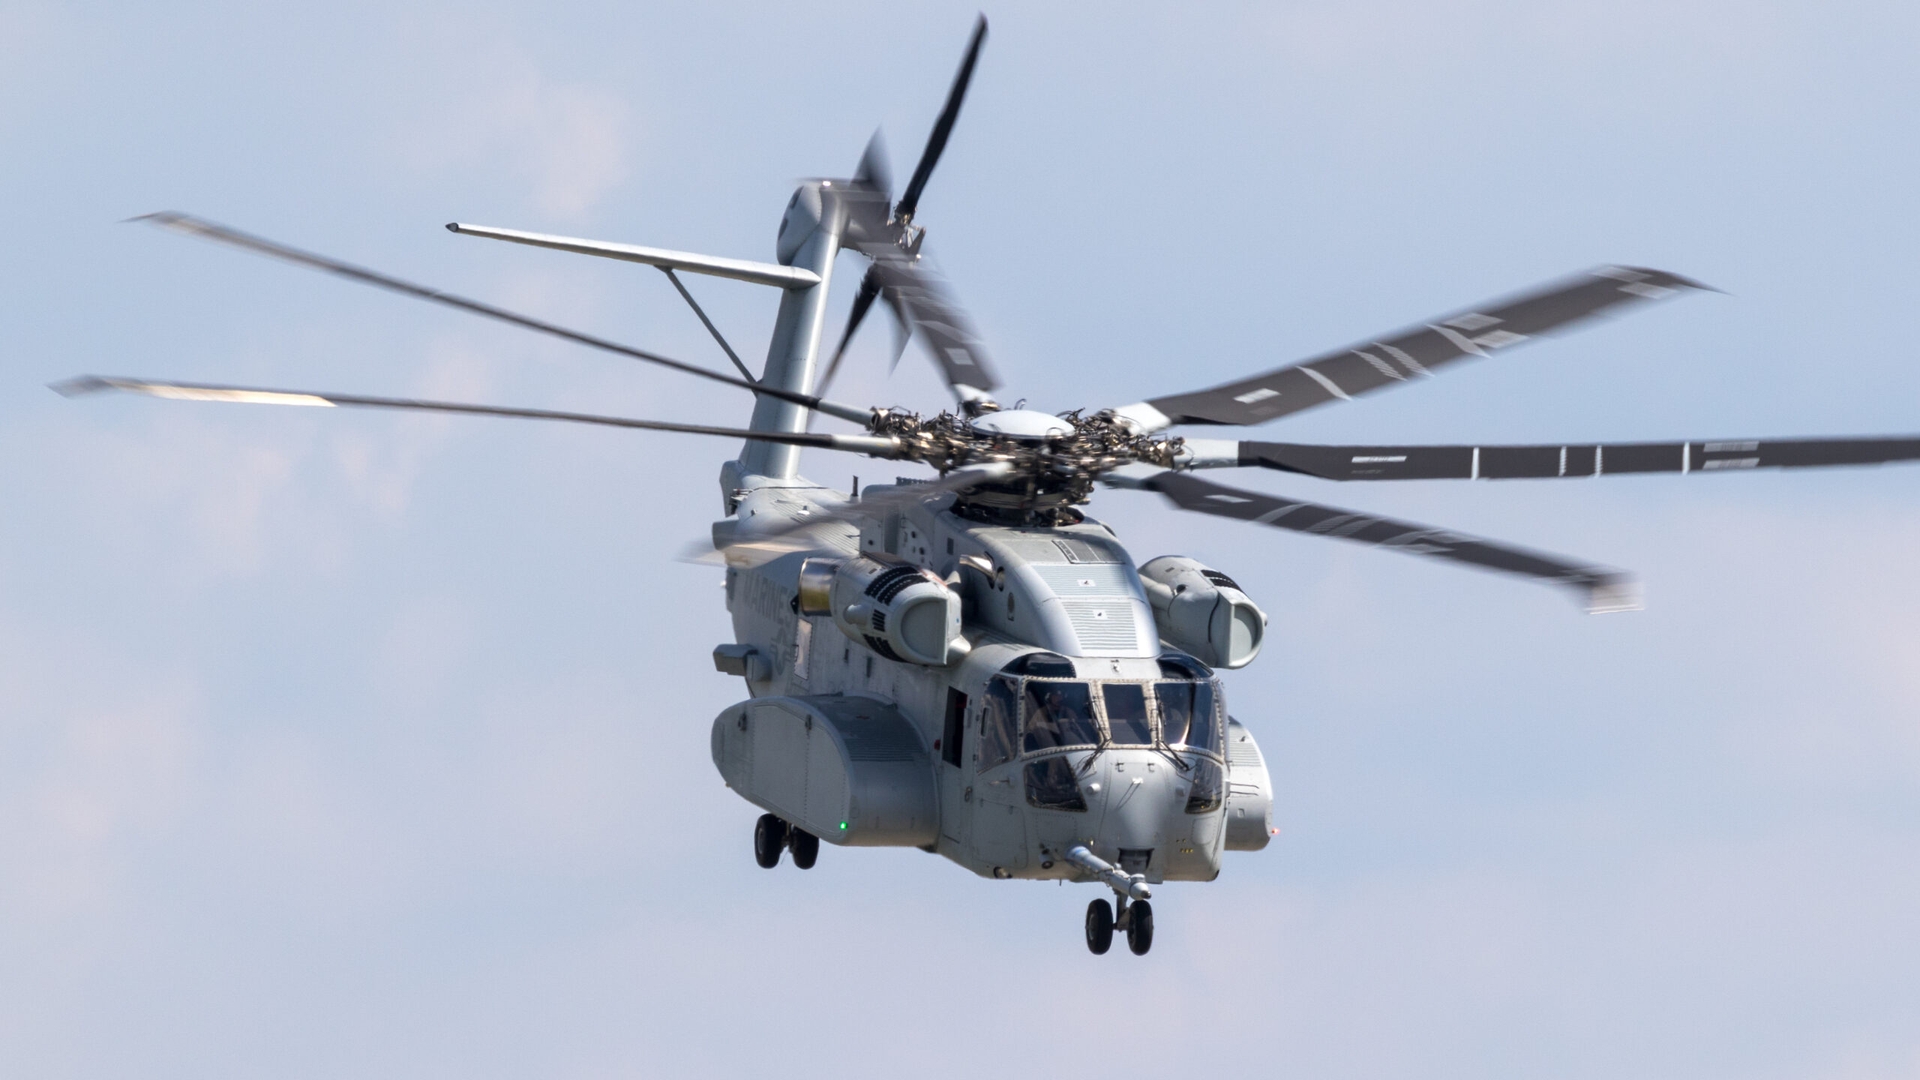 CH-53K King Stallion helicopter